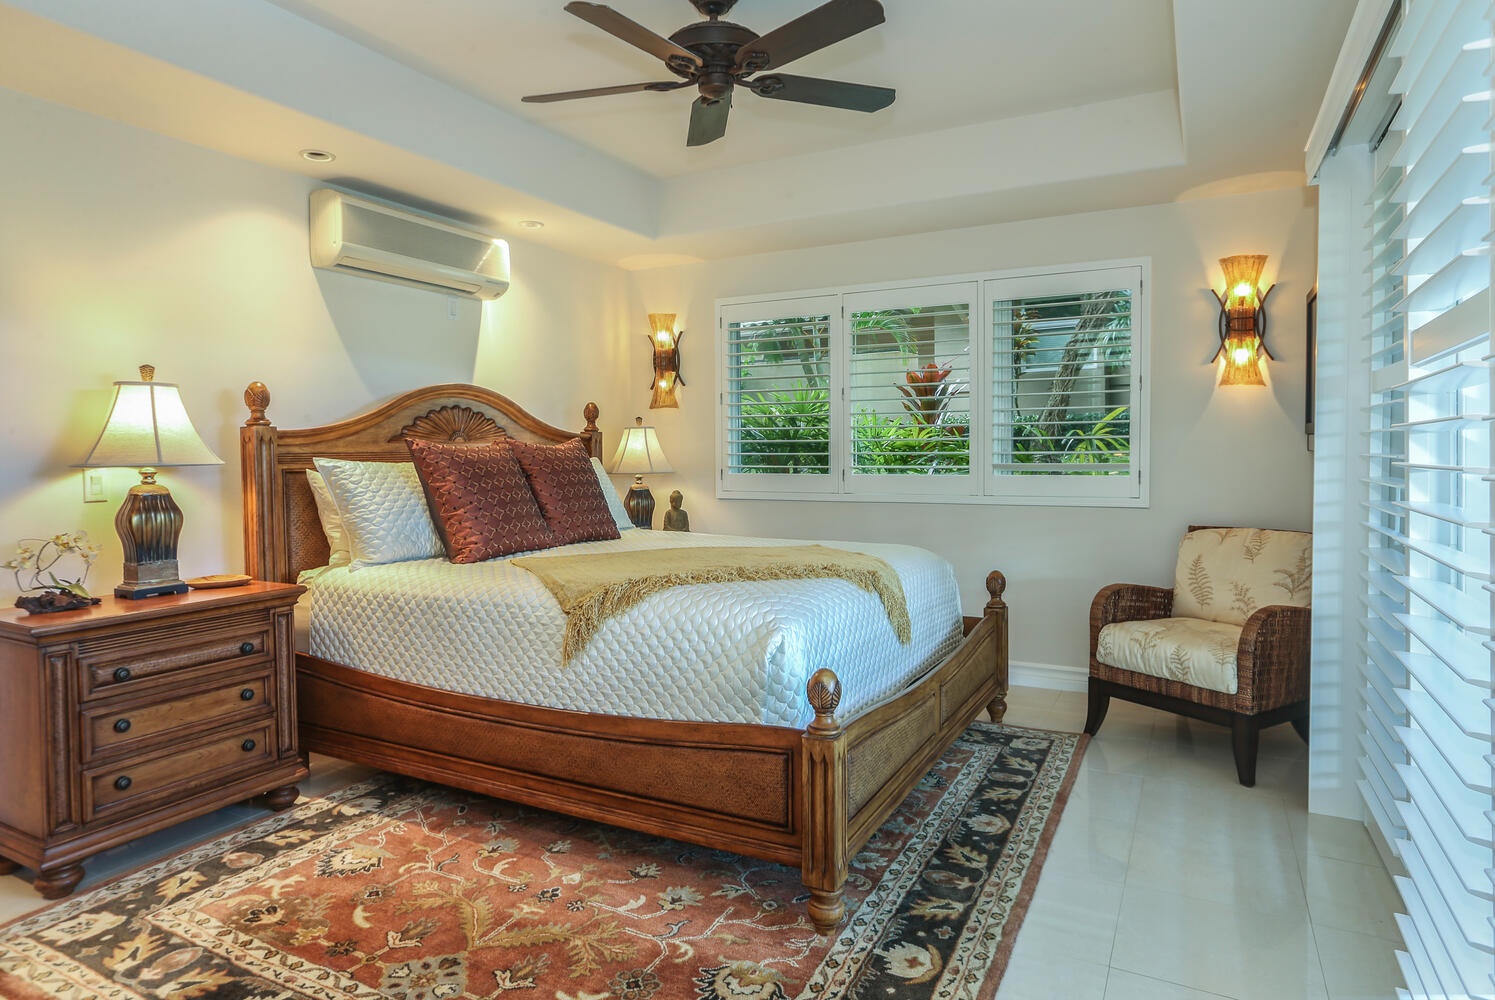 Princeville Vacation Rentals, Hale Moana - Guest bedroom #3 with King cal bed